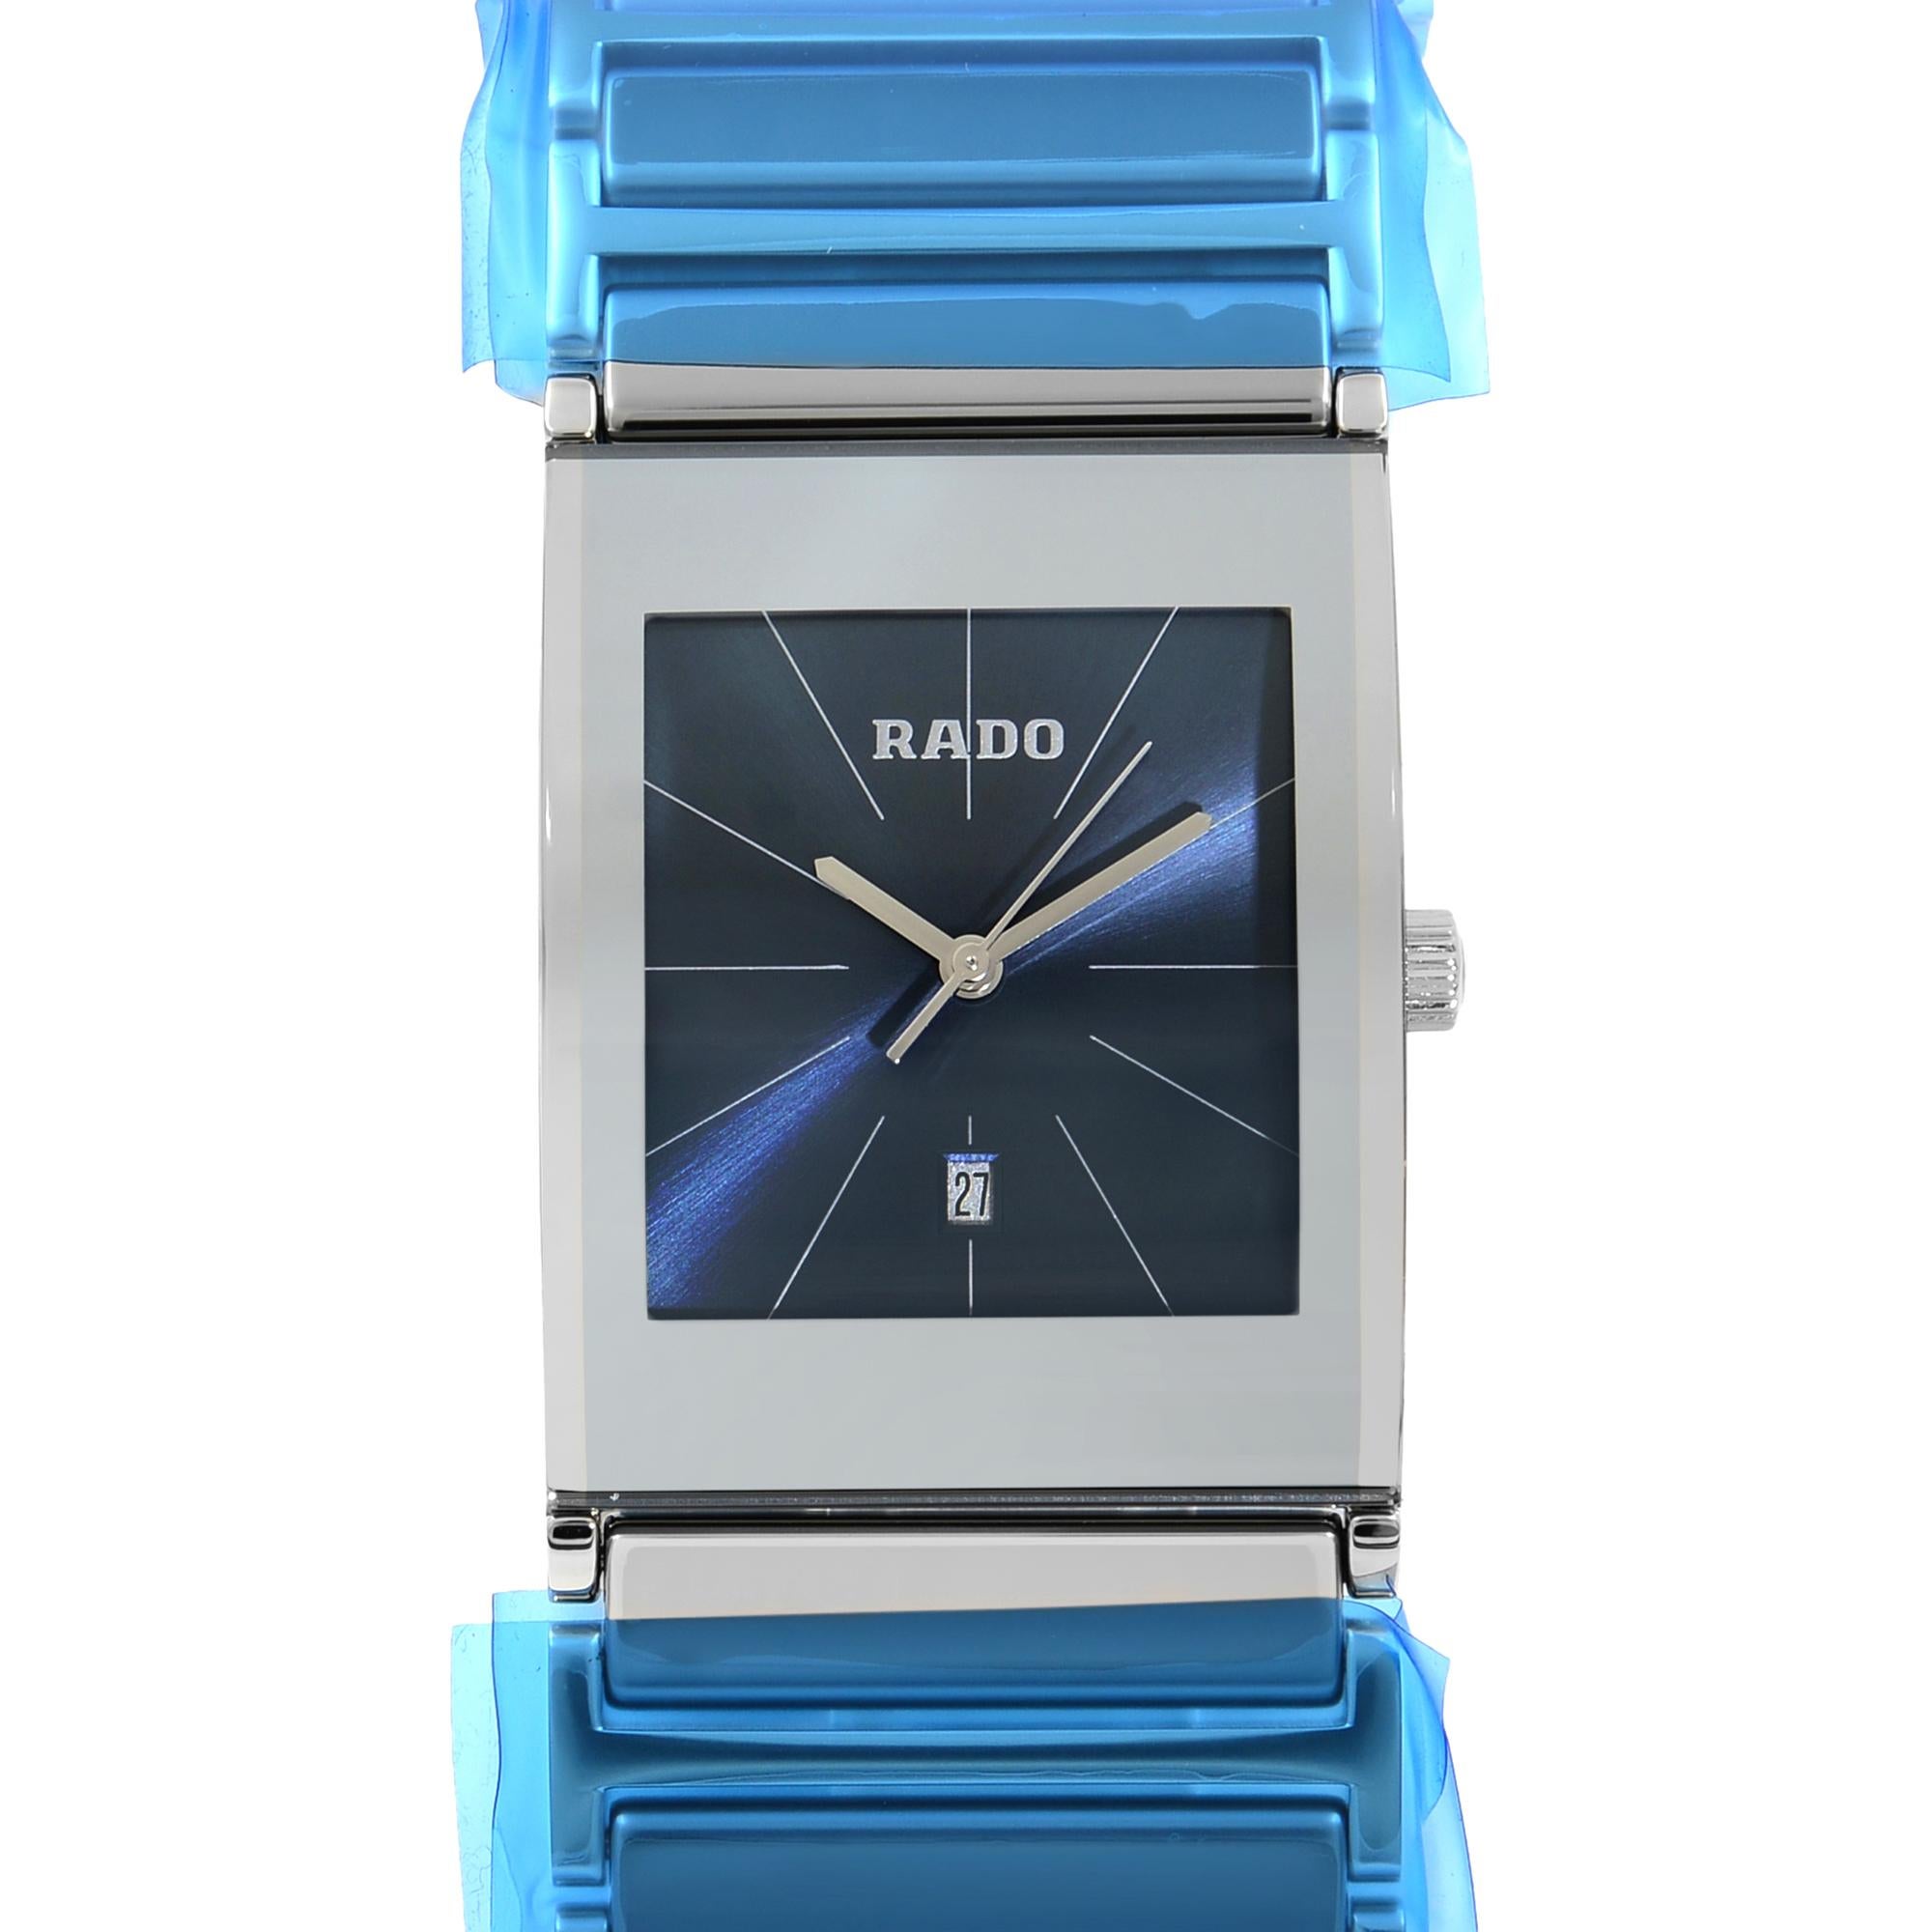 This brand new Rado Integral R20745202 is a beautiful men's timepiece that is powered by a quartz movement which is cased in a stainless steel case. It has a  rectangle shape face, date dial, and has hand sticks style markers. It is completed with a